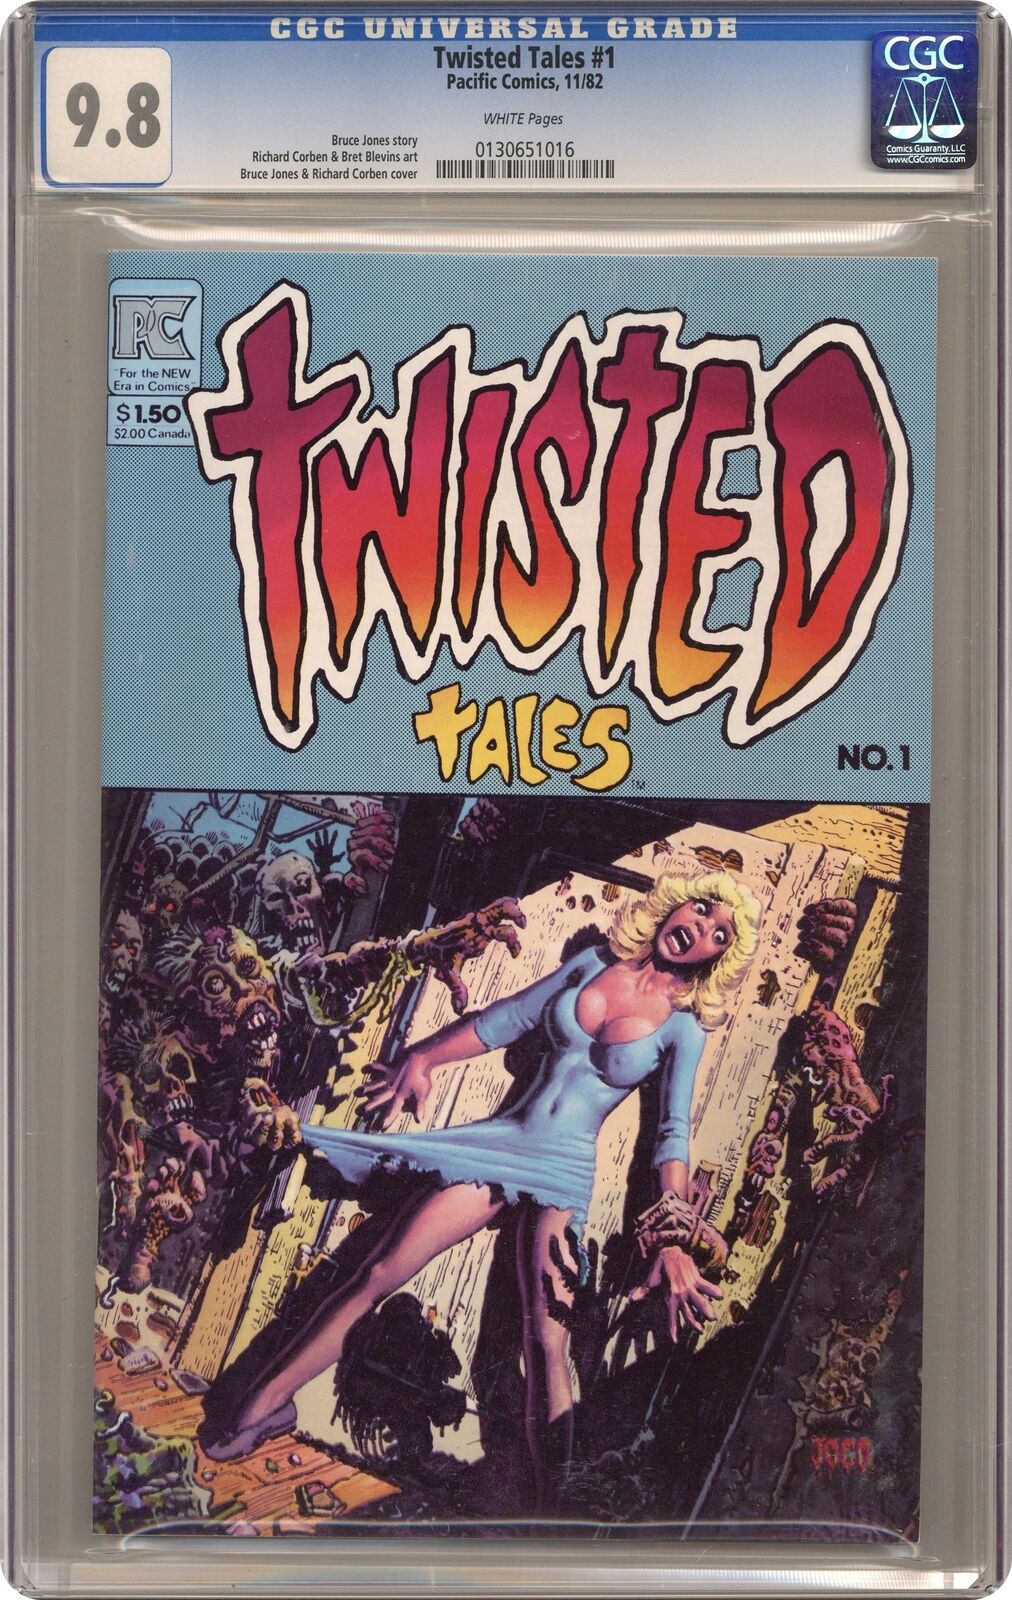 Twisted Tales #1 CGC 9.8 1982 0130651016